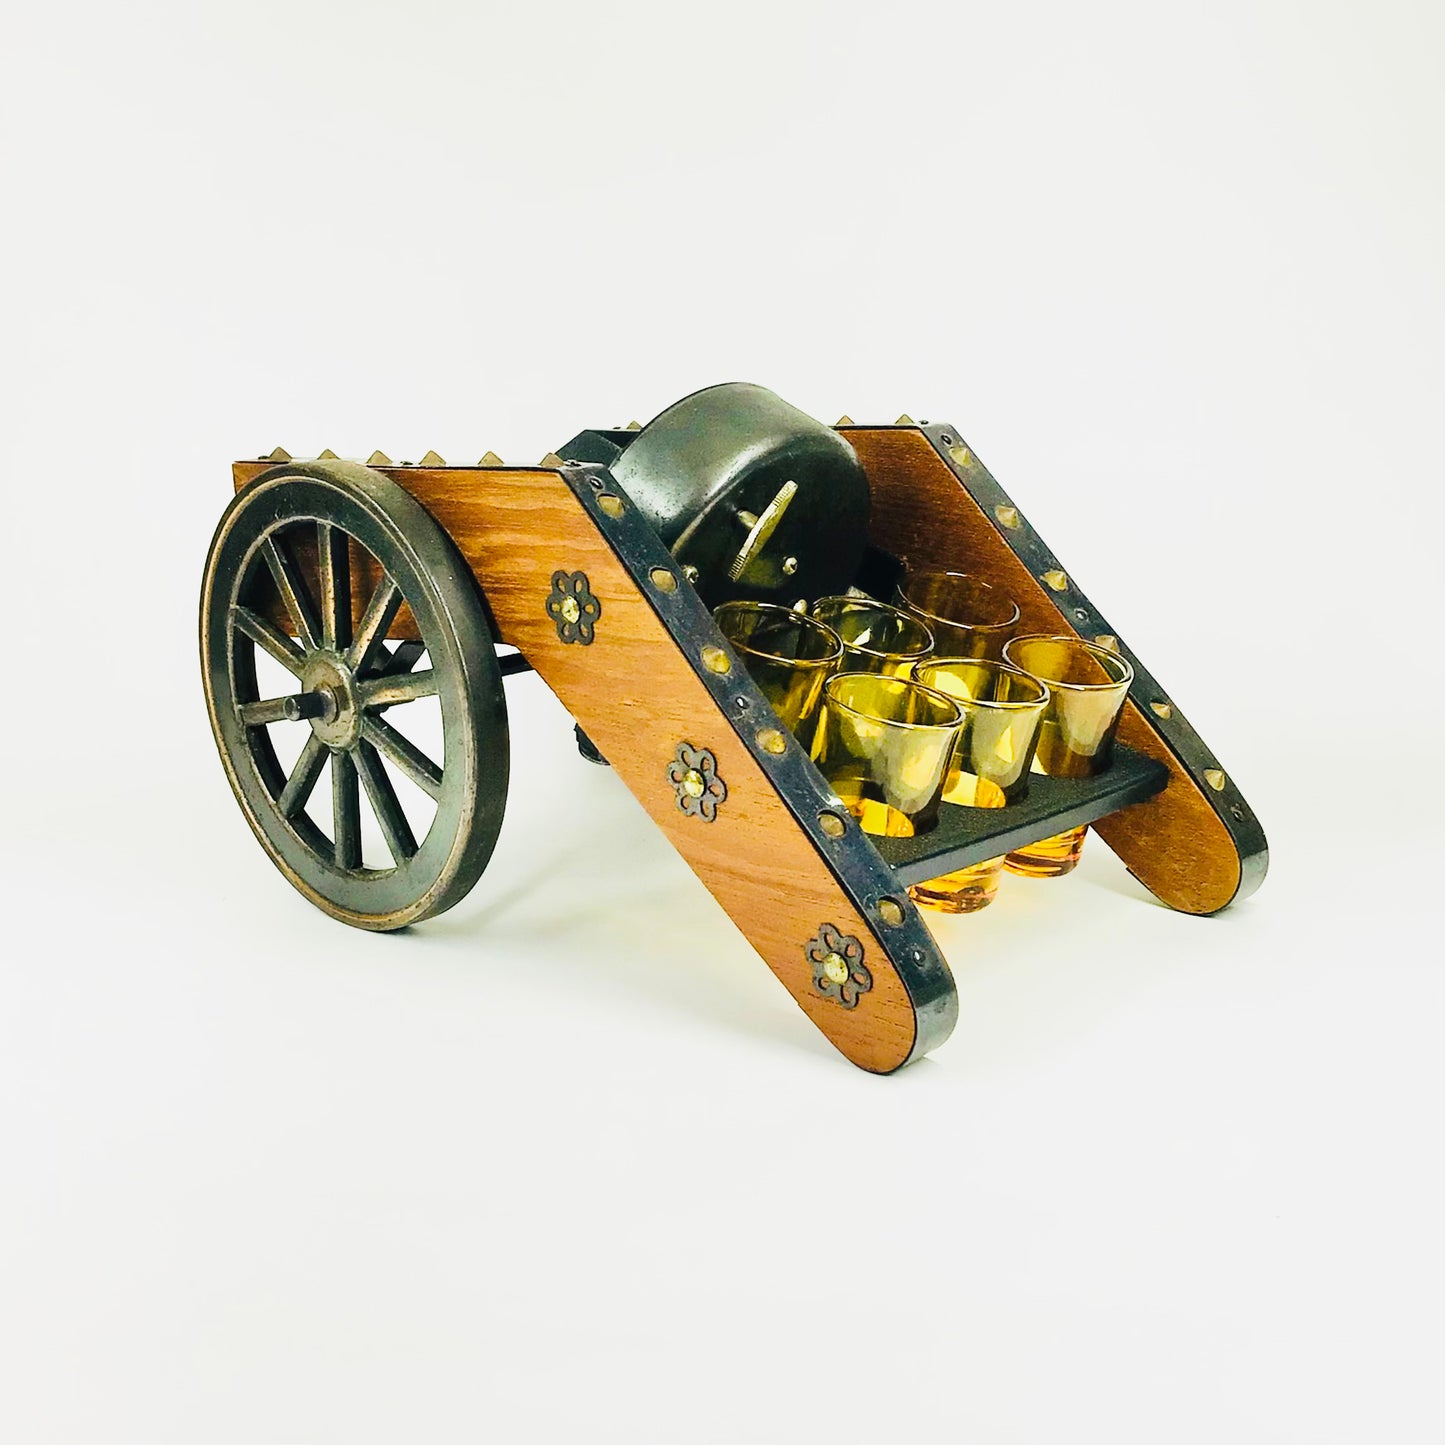 Retro wagon carrying amber shot glasses with bottle slot